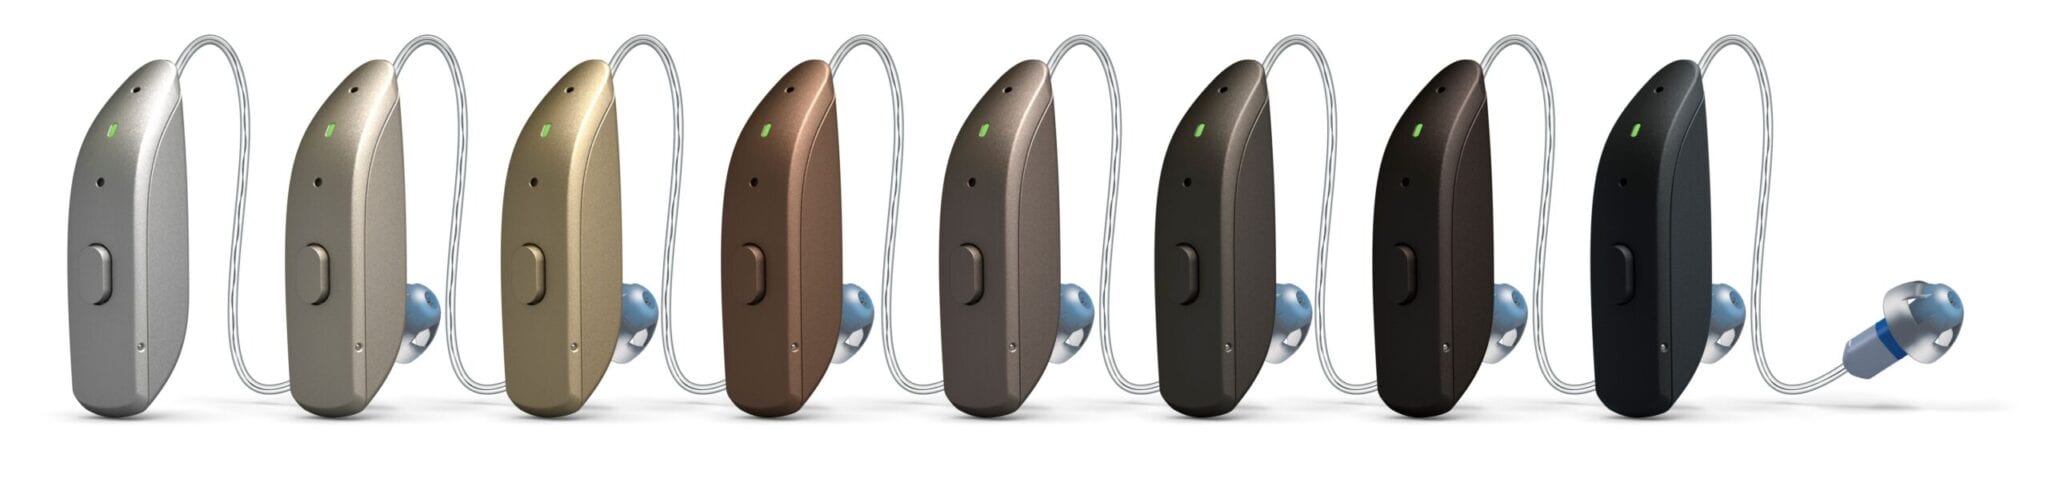 Resound OMNIA Receiver-in-the-Ear (RIE) Hearing Aids 